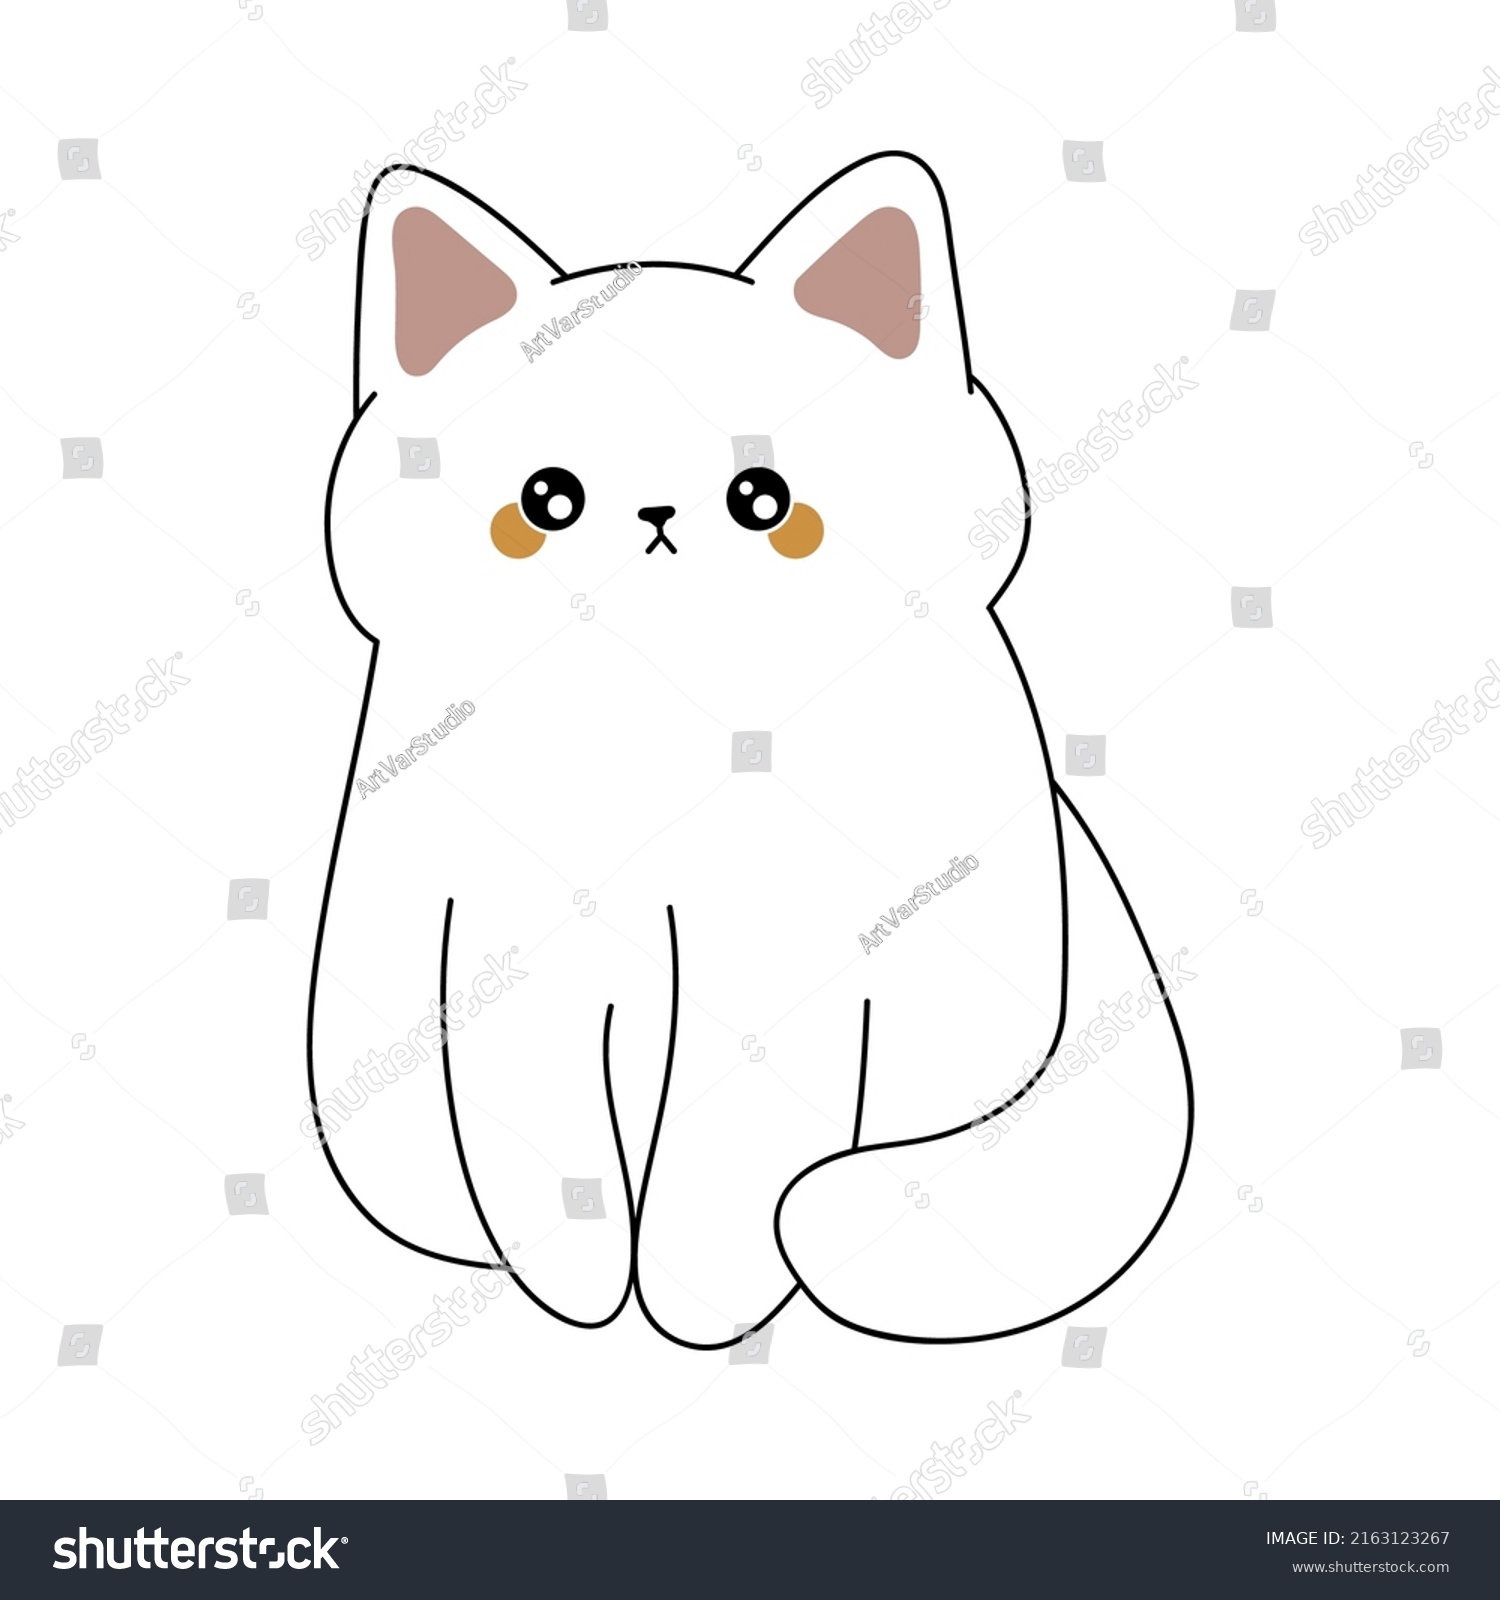 SVG of Cute white kitten. Vector illustration of a cute kitten. Cute little illustration of cat for kids, baby book, fairy tales, covers, baby shower invitation, textile t-shirt. svg